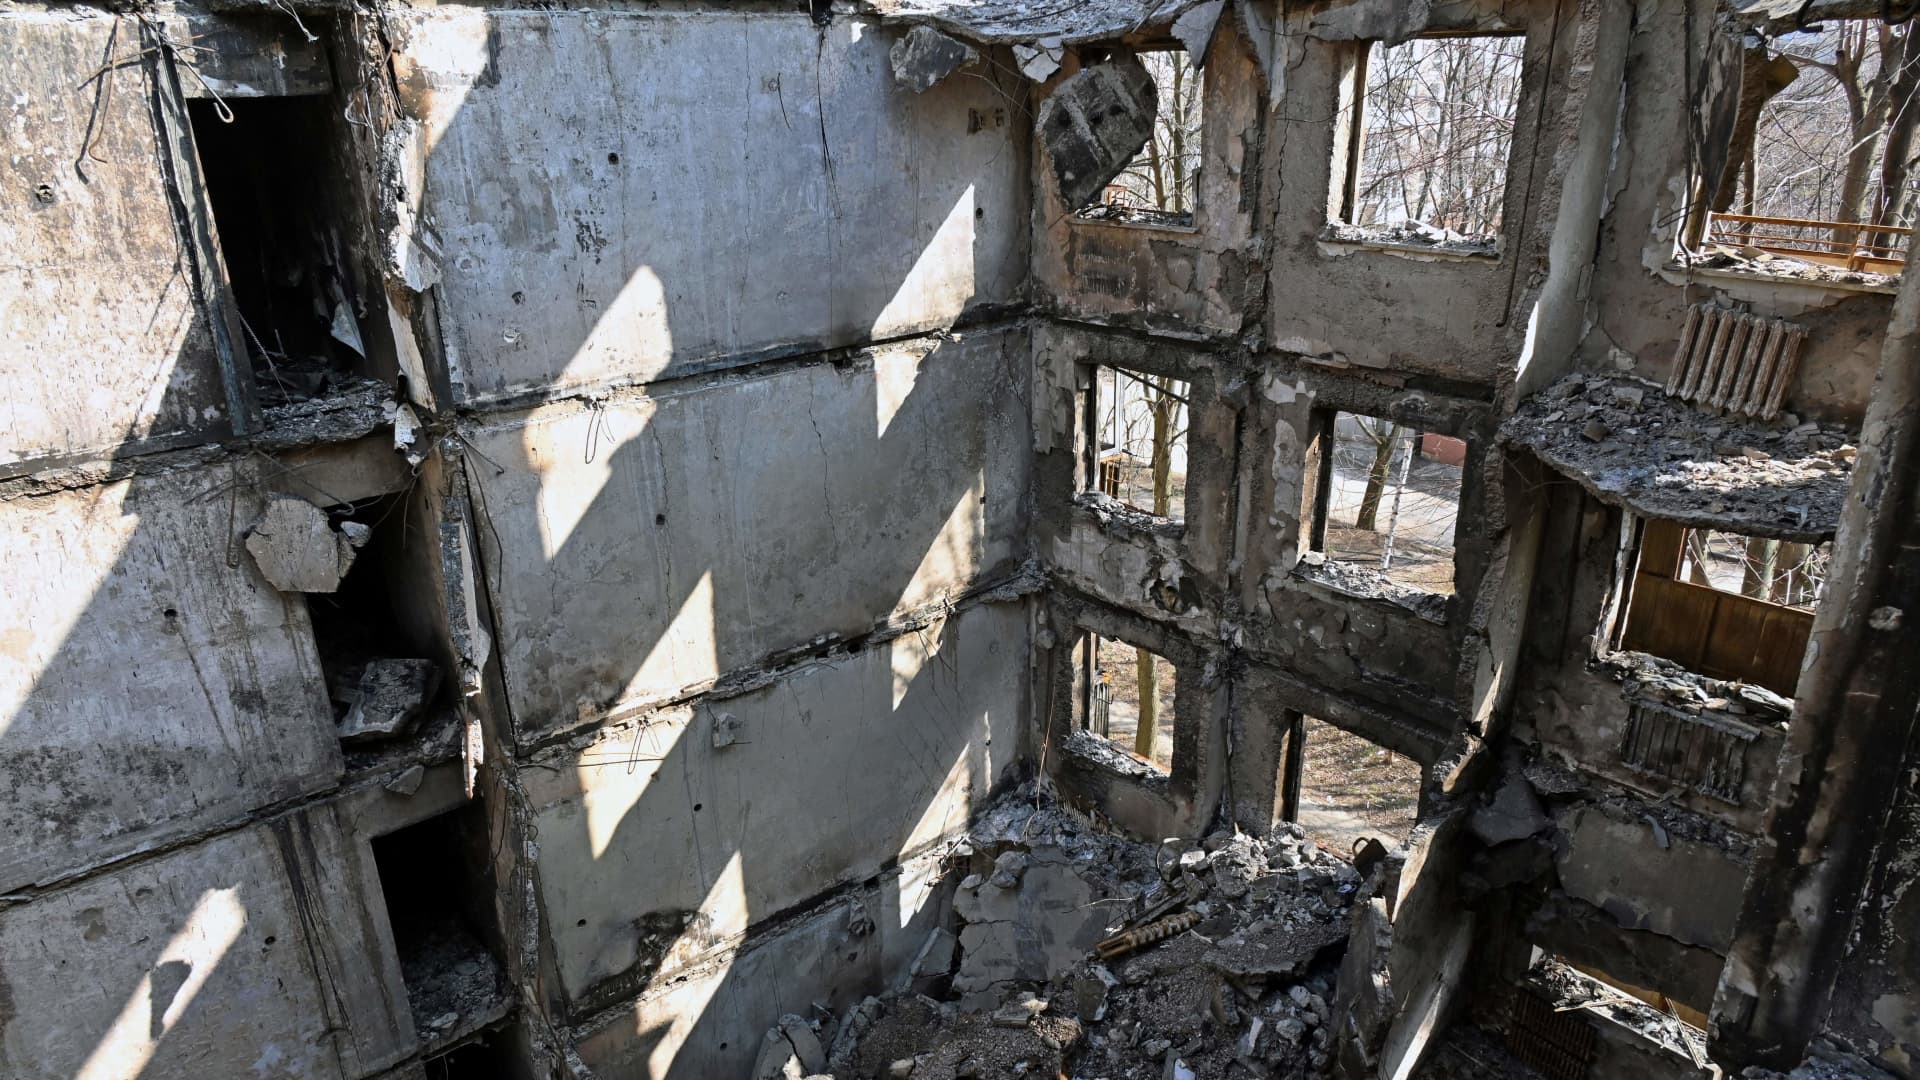 This photograph shows a partially destroyed five storey residential building in the Ukrainian city of Kharkiv, on April 10, 2022, amid the Russian invasion of Ukraine.